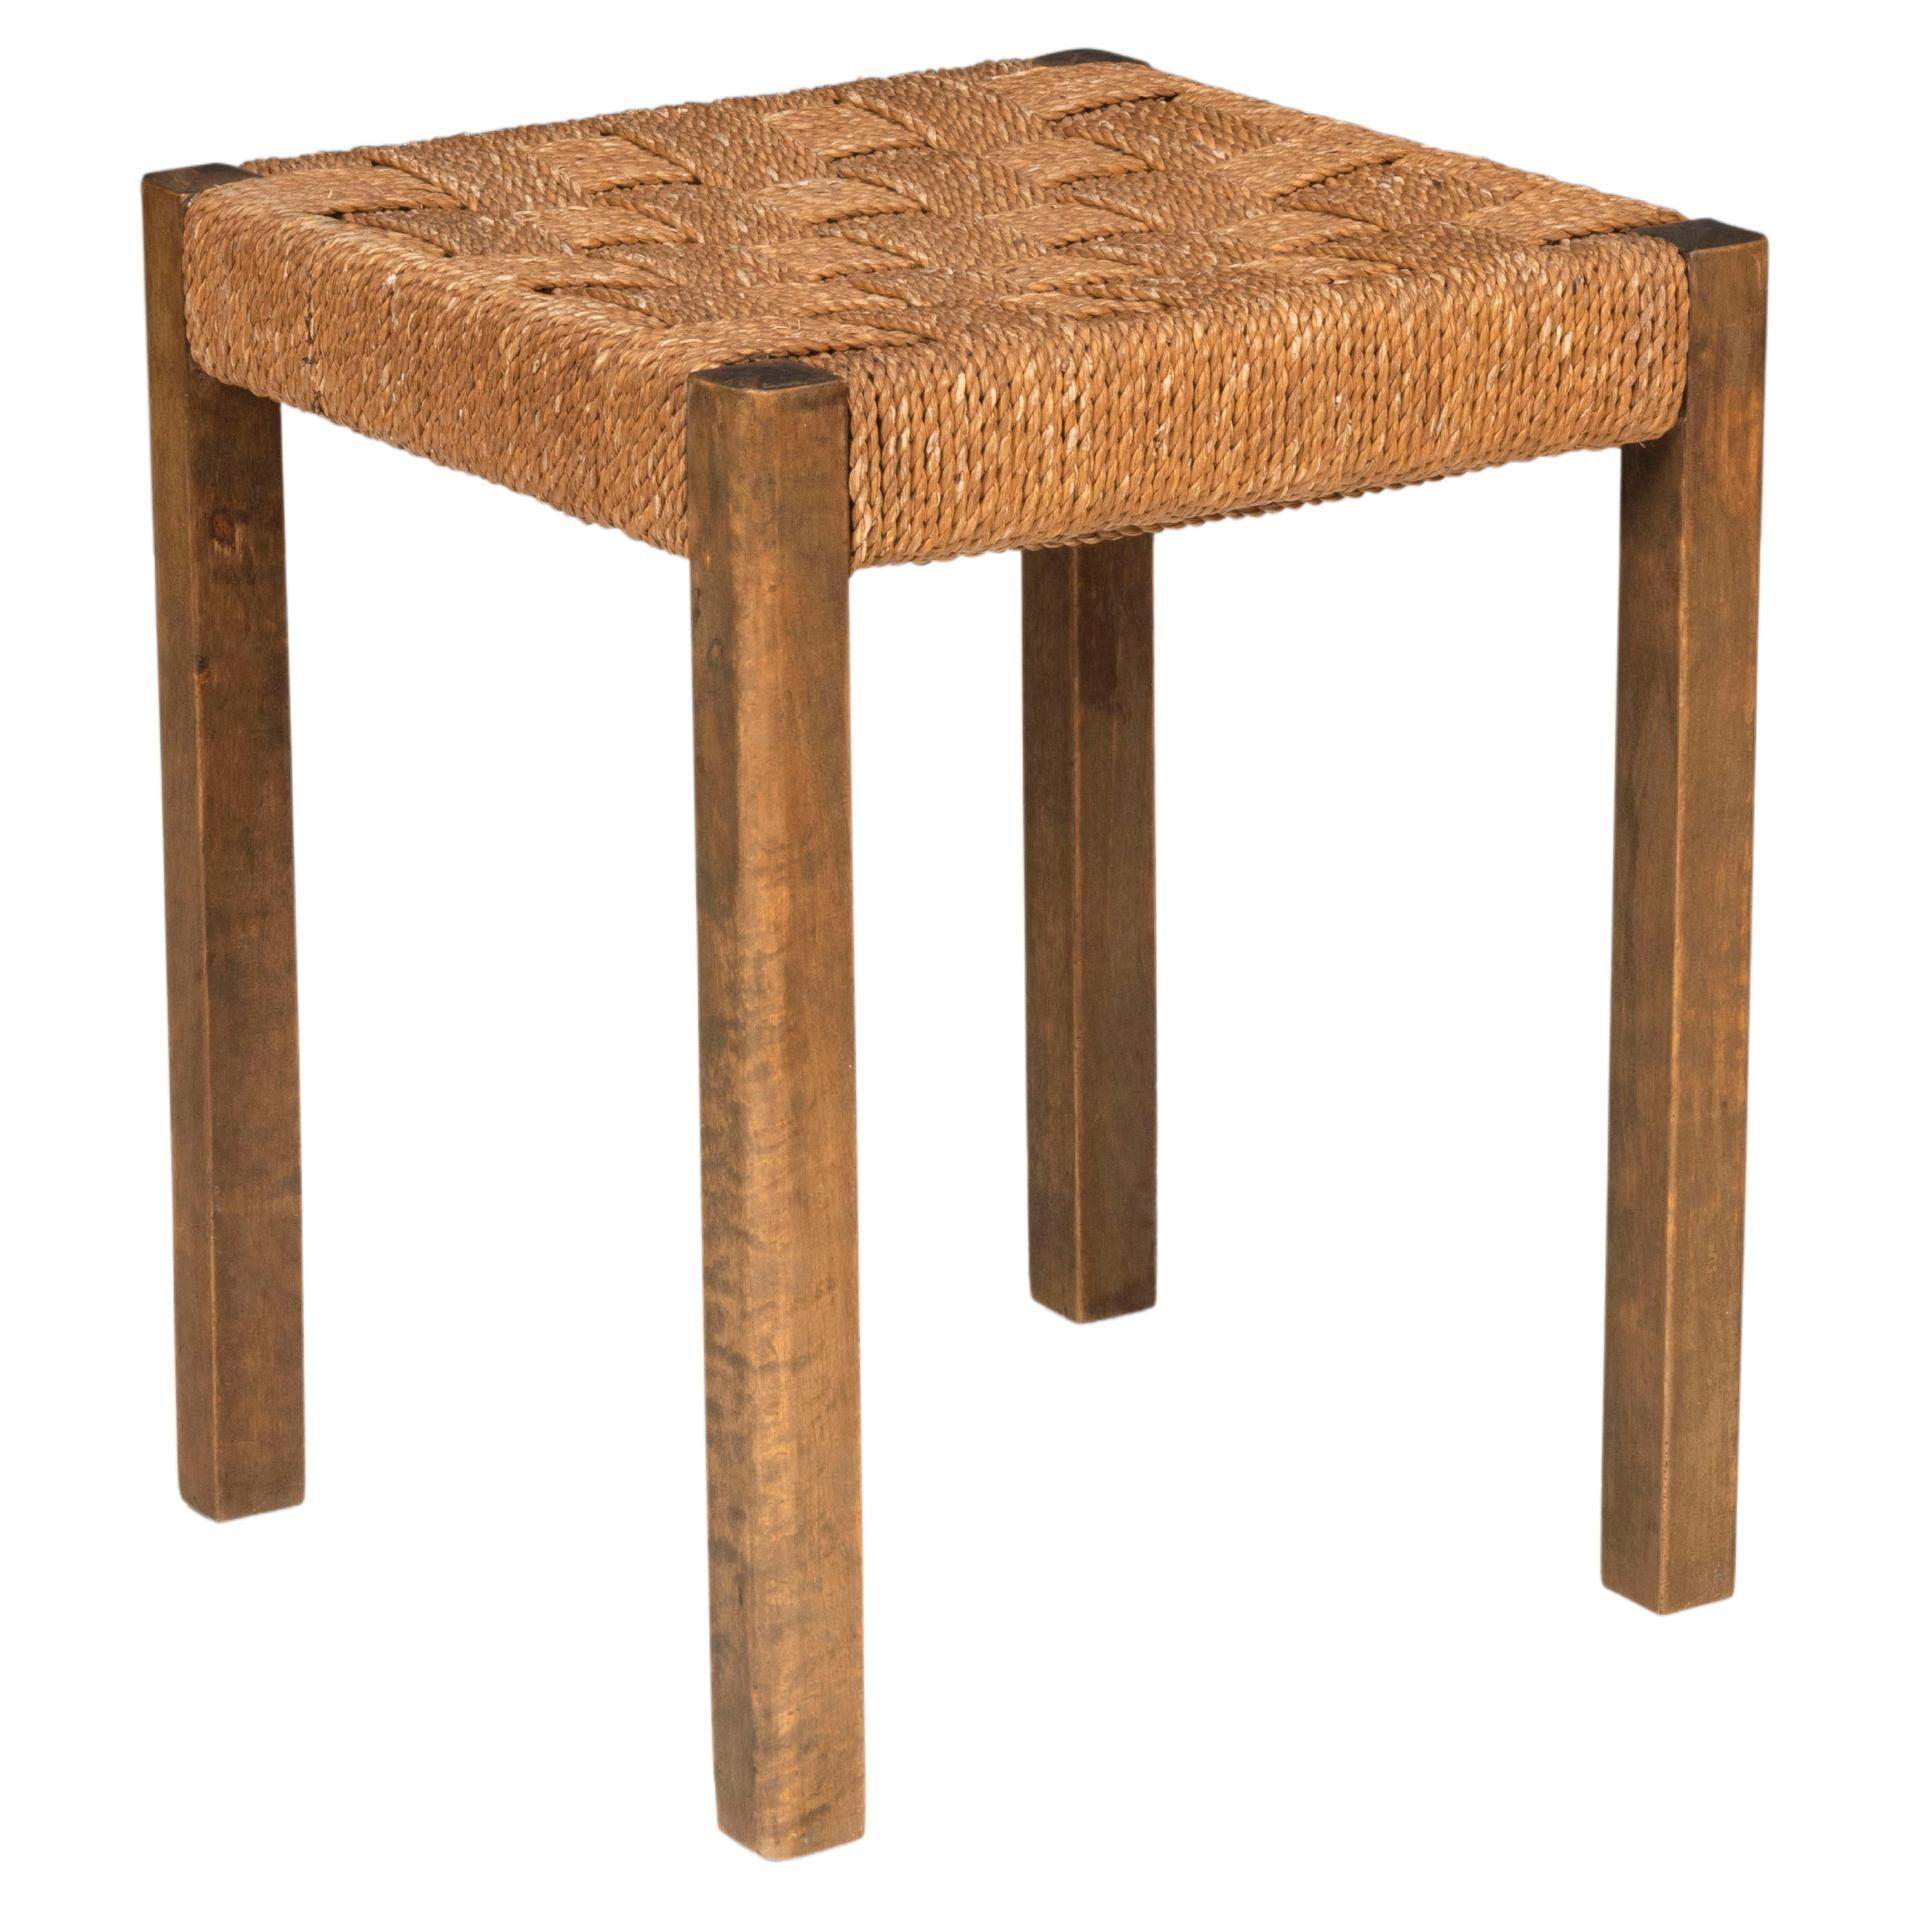 Swedish Grace Axel Larsson Seagrass and Beech Stool for SMF, 1930's For Sale